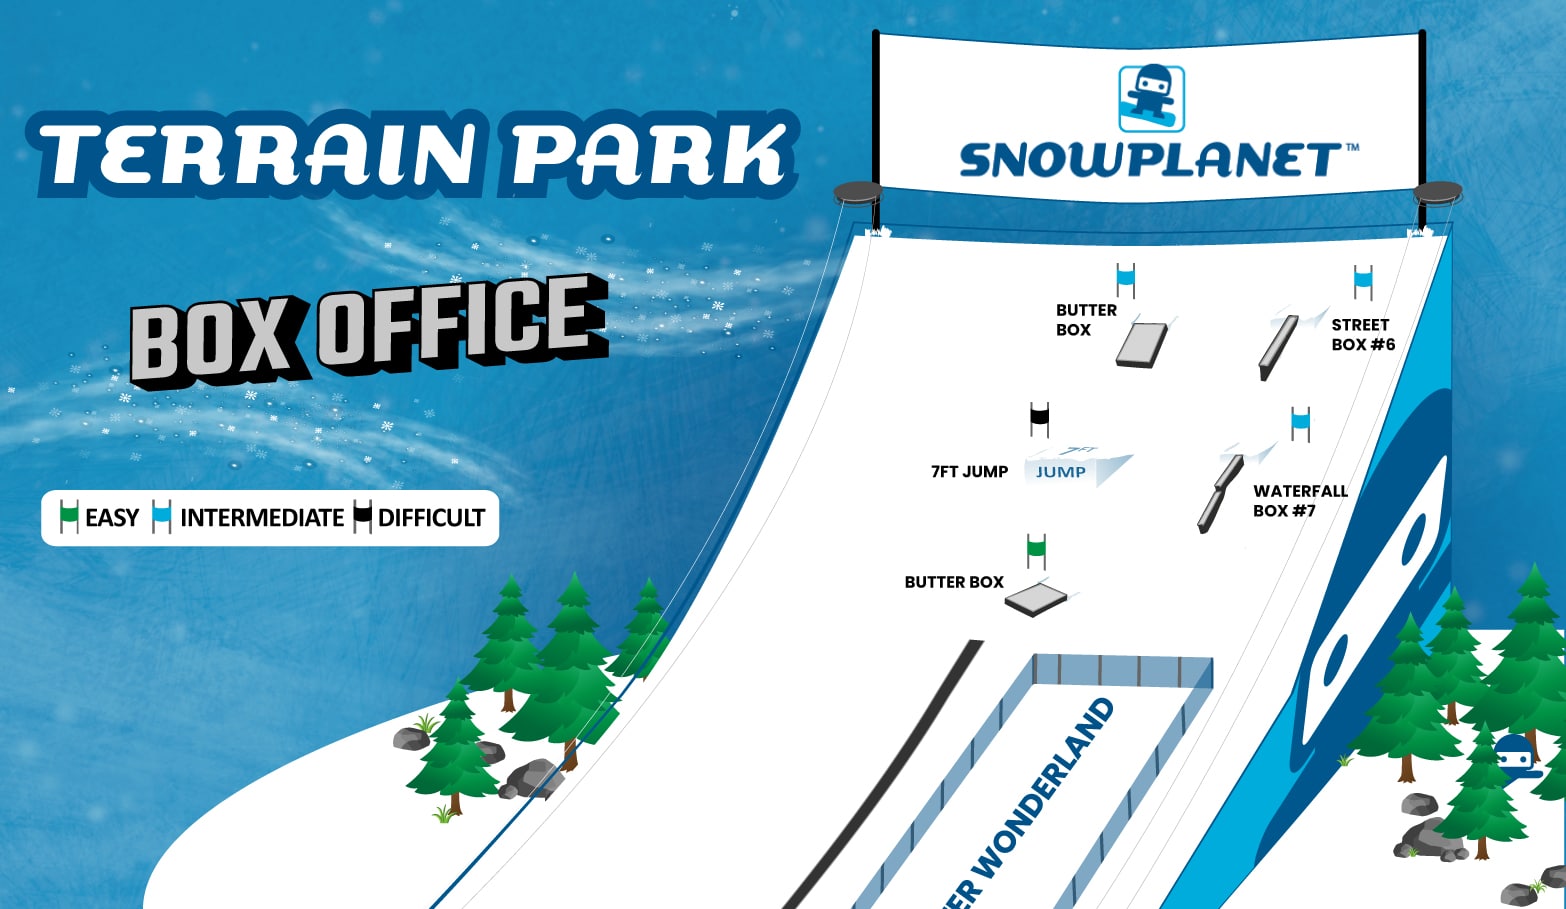 Map of current Terrain Park at Snowplanet